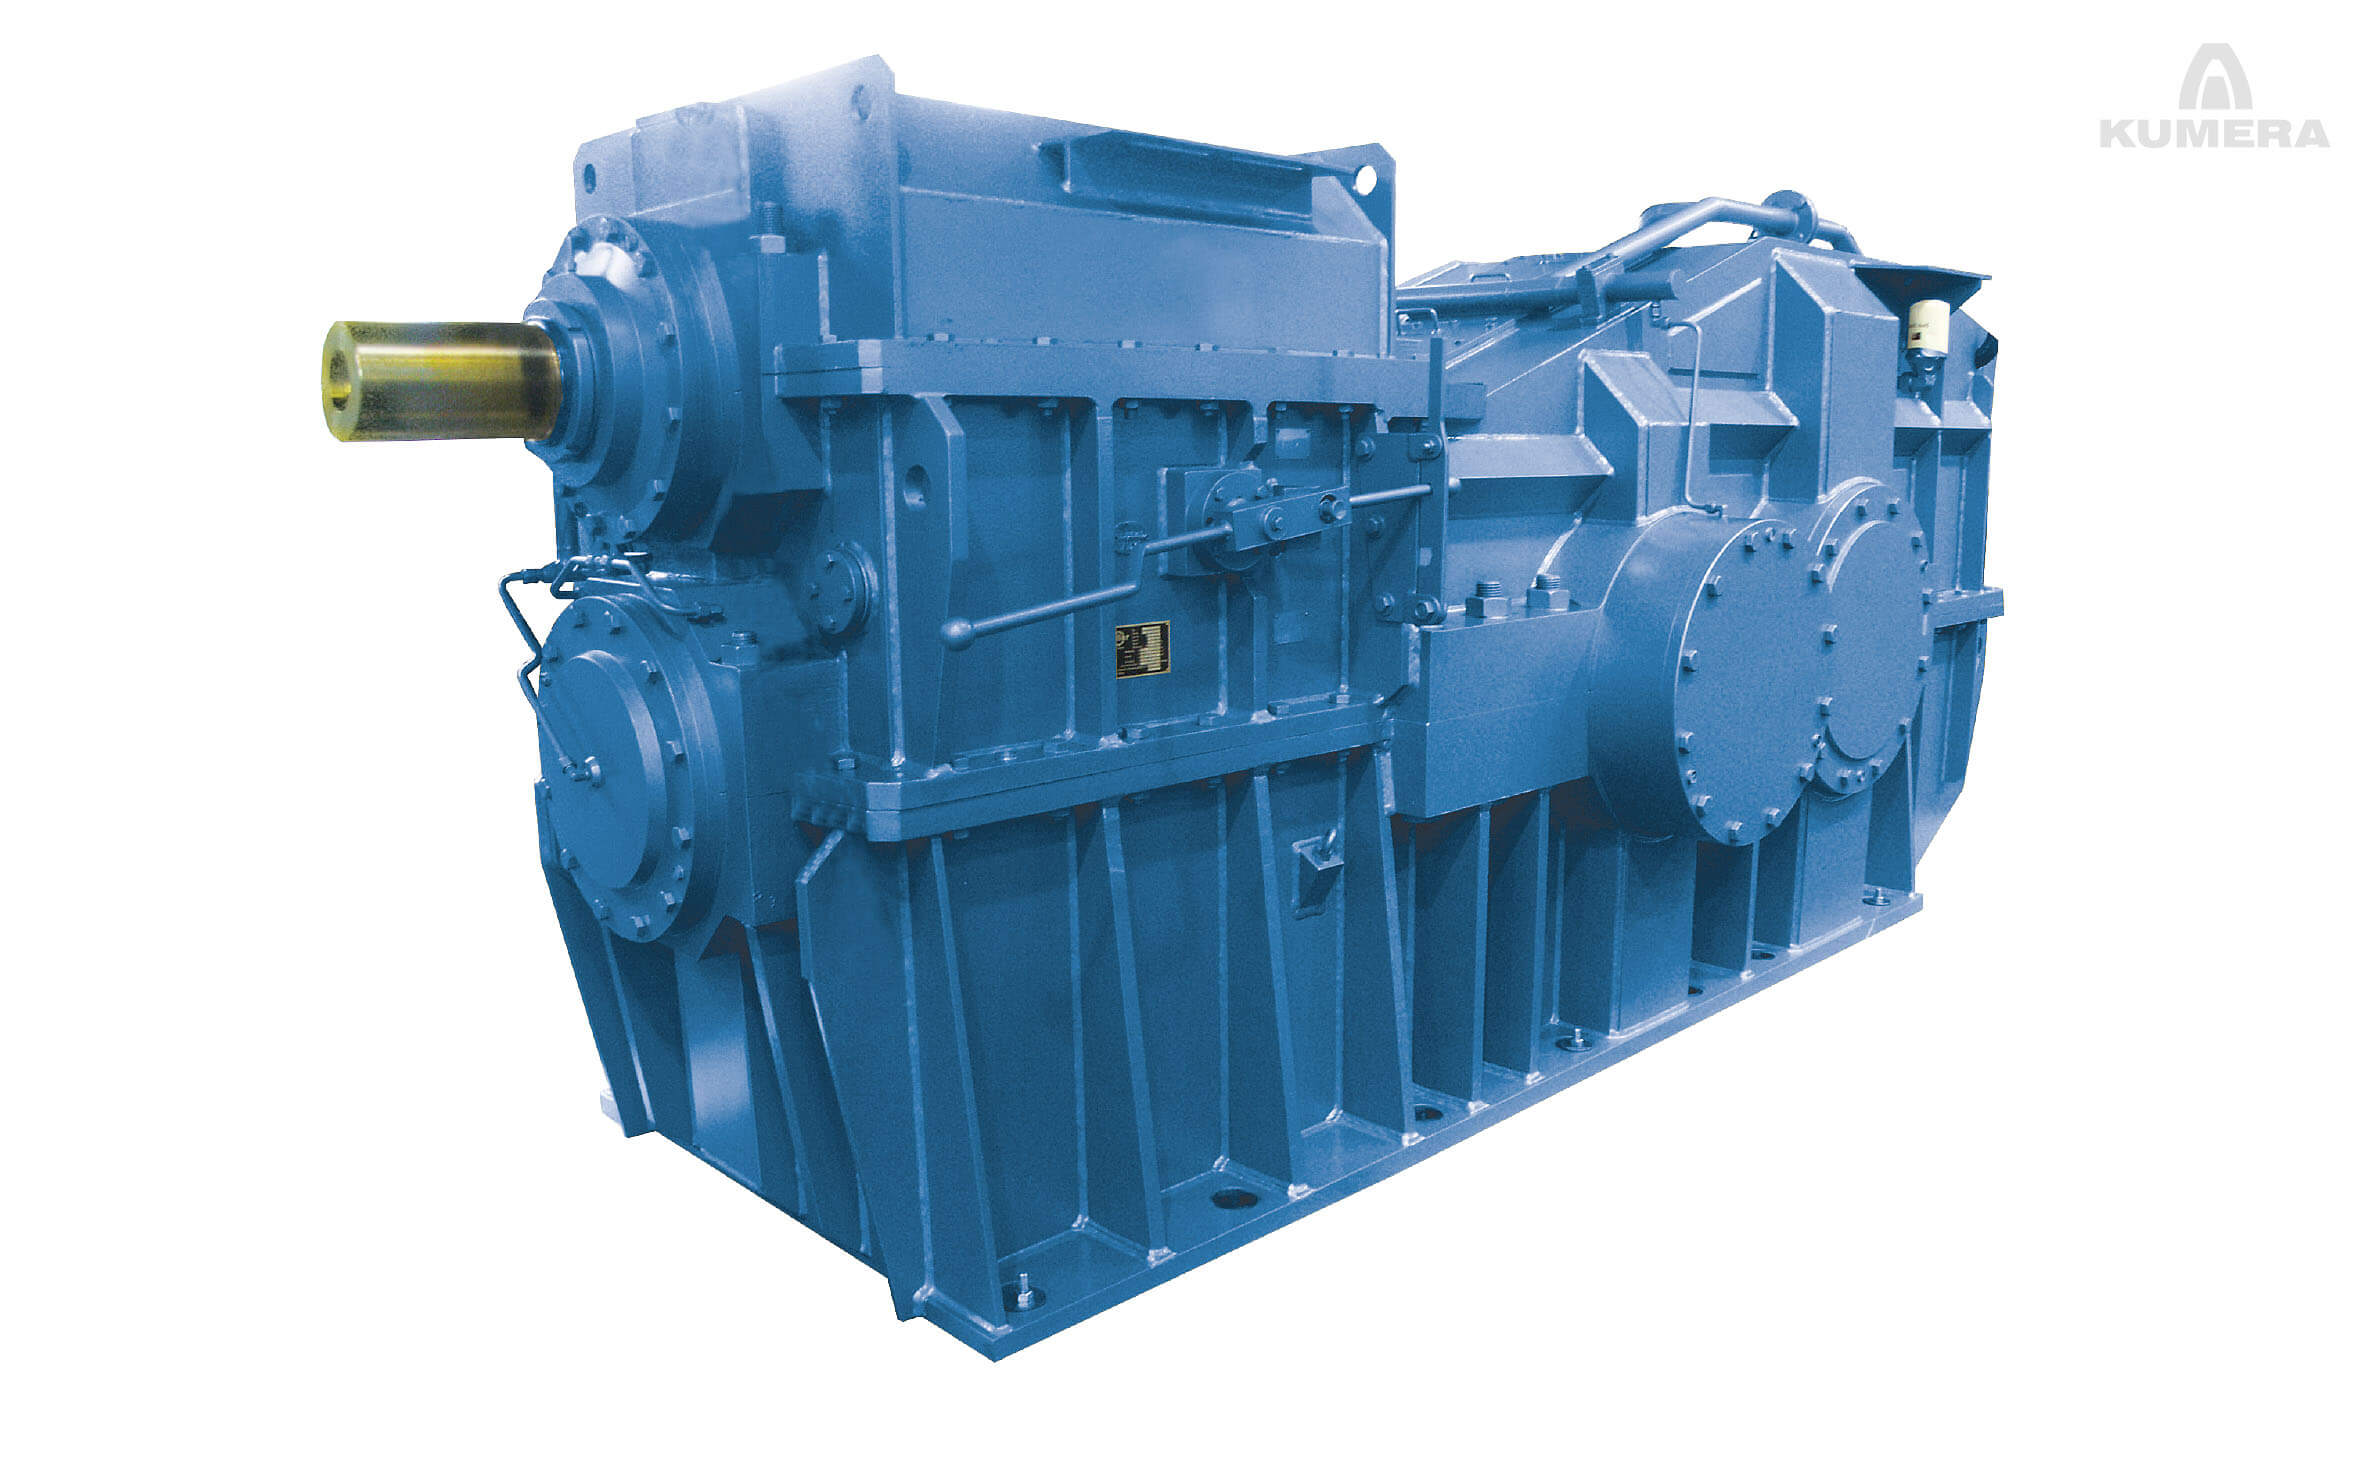 Kumera Custom Built Heavy-Duty Gearboxes for Opencast Mining. Kumera Conveyor Gearboxes and Landing Gearboxes.